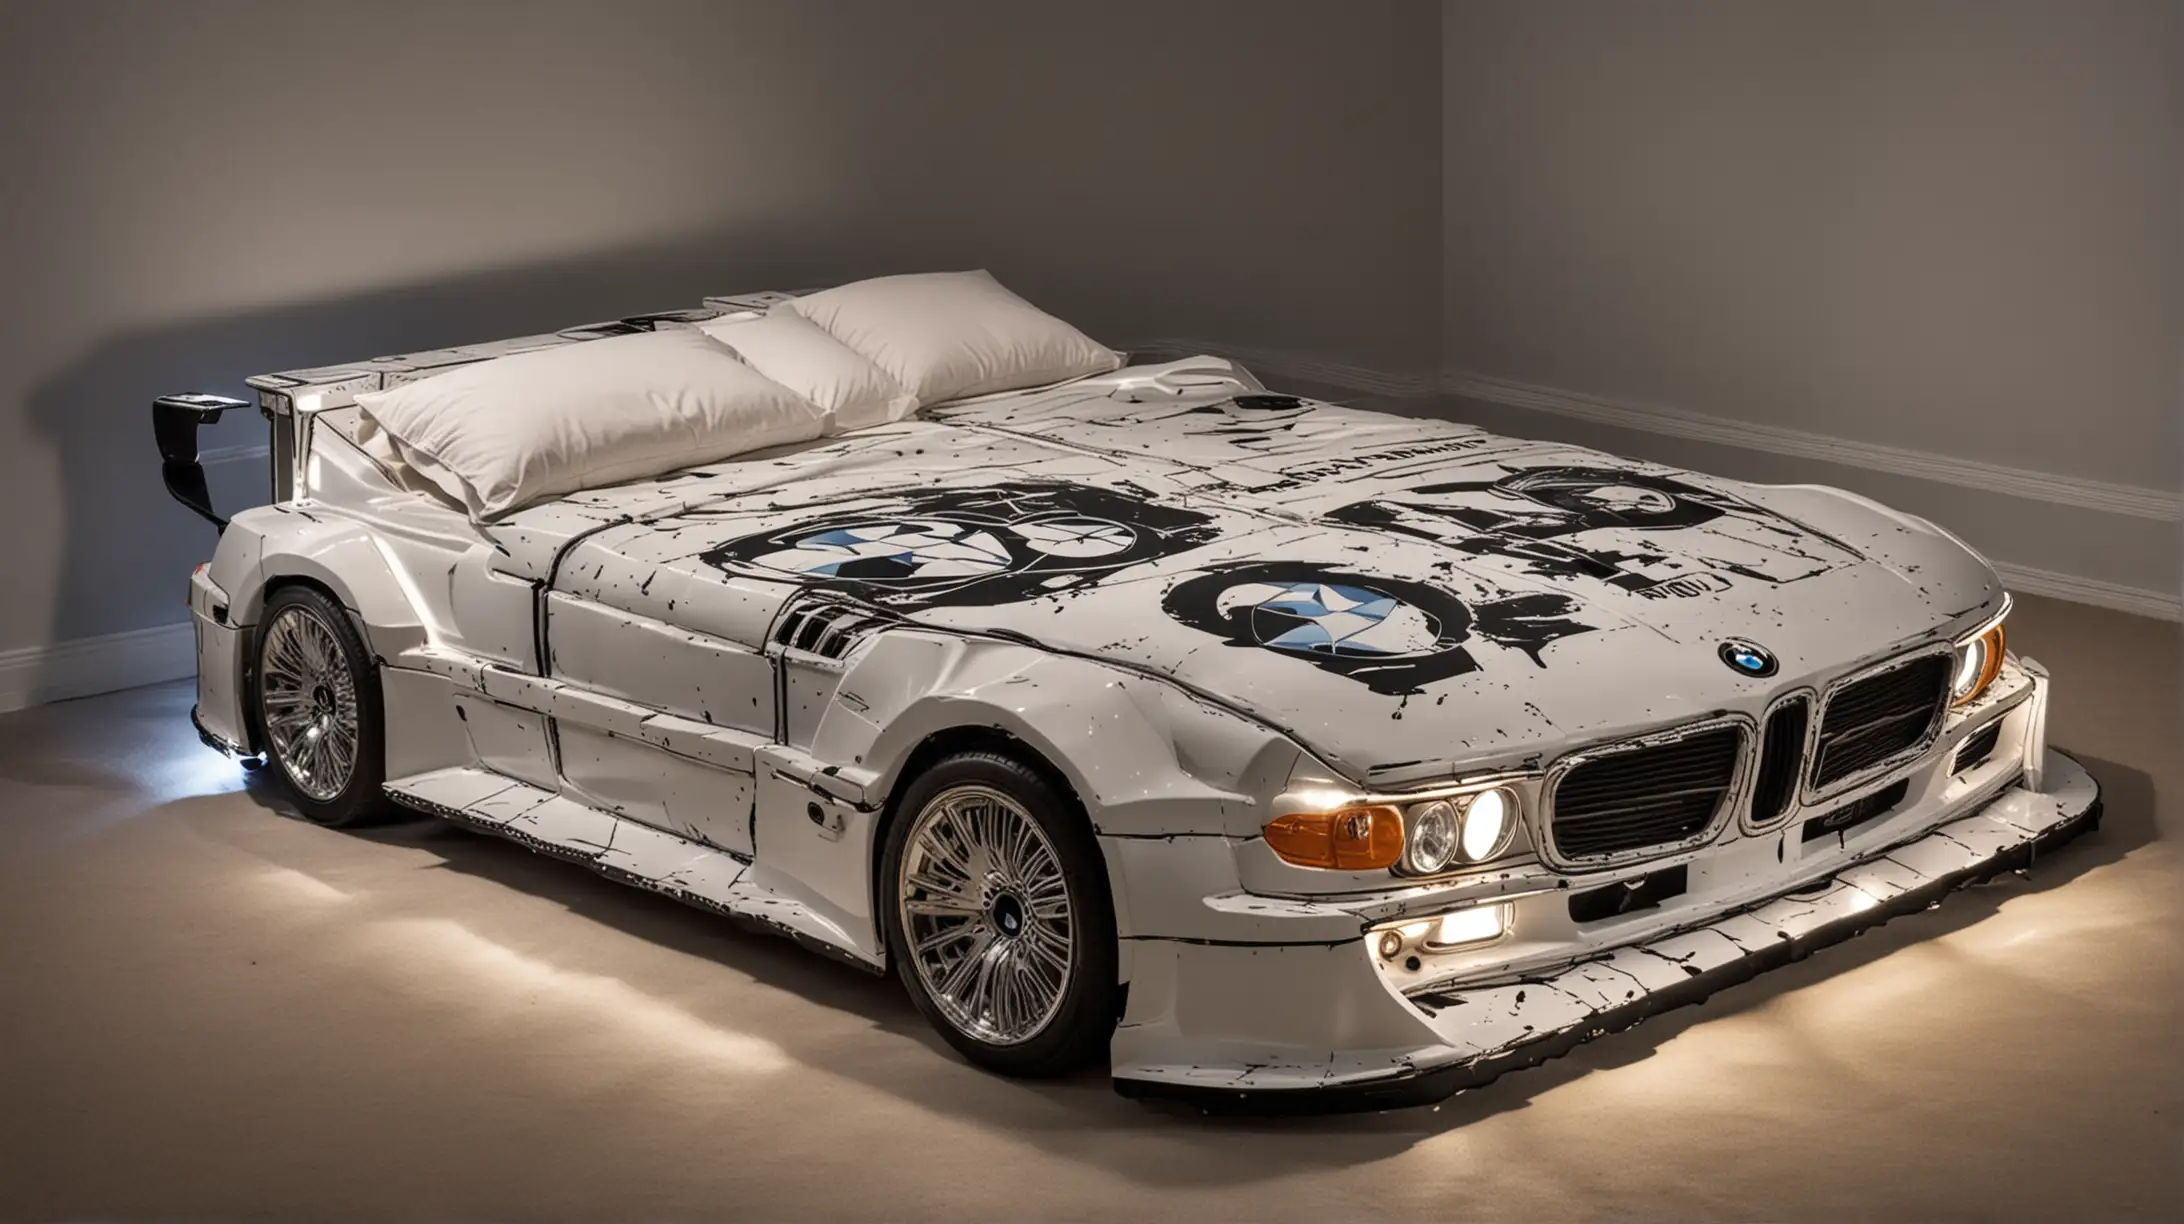 Double bed in the shape of a BMW car with headlights on and "dolars" graphics